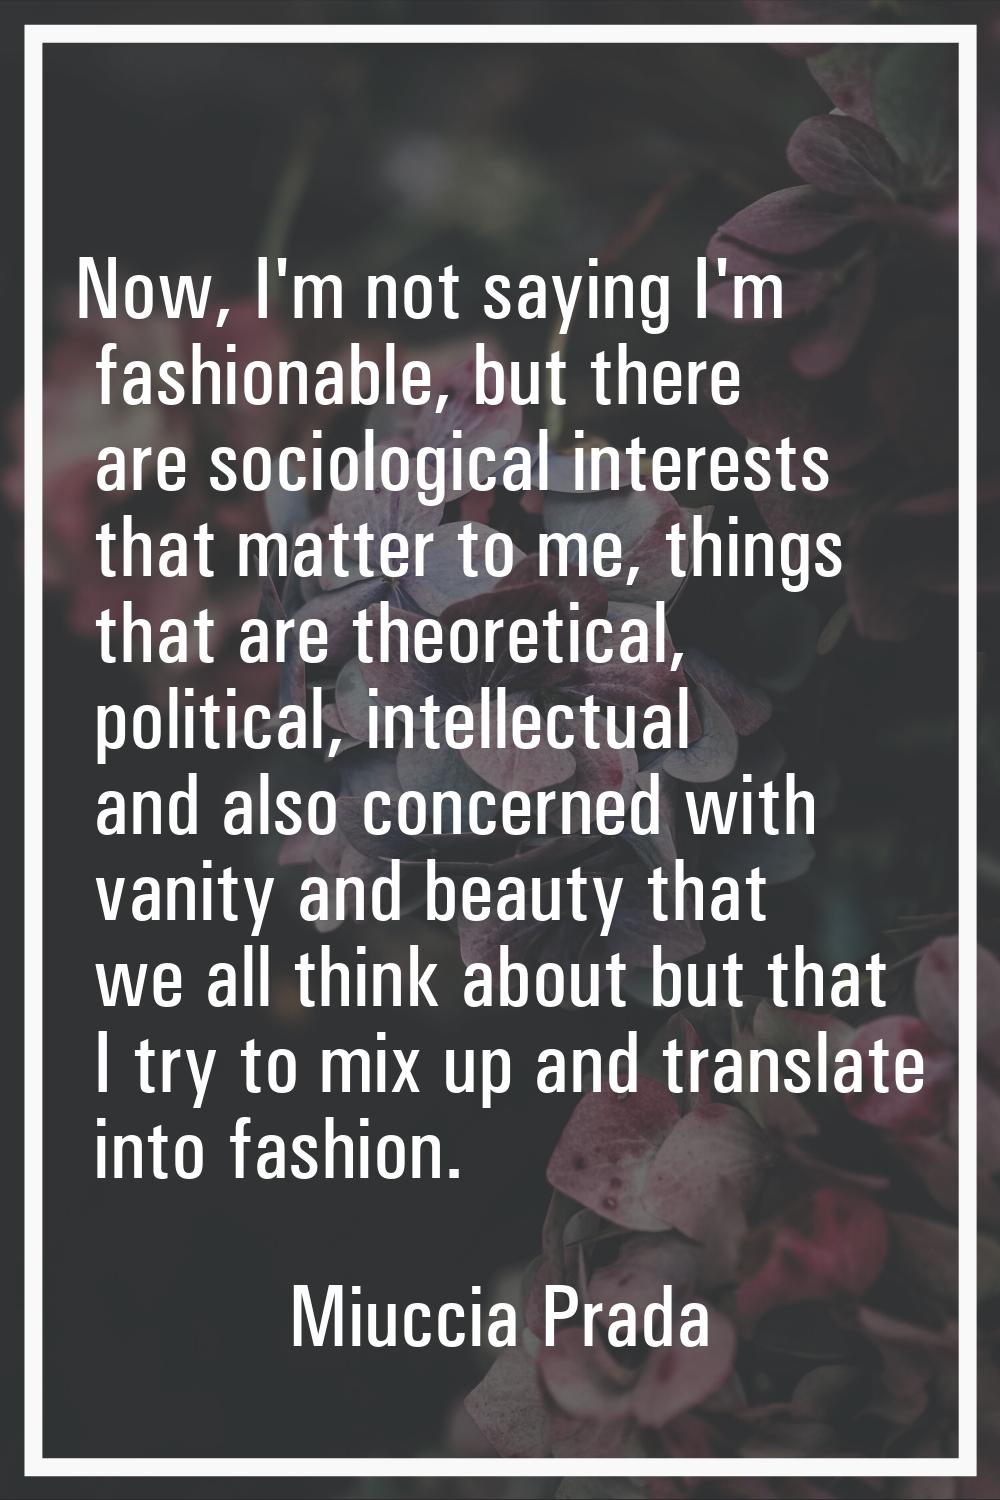 Now, I'm not saying I'm fashionable, but there are sociological interests that matter to me, things